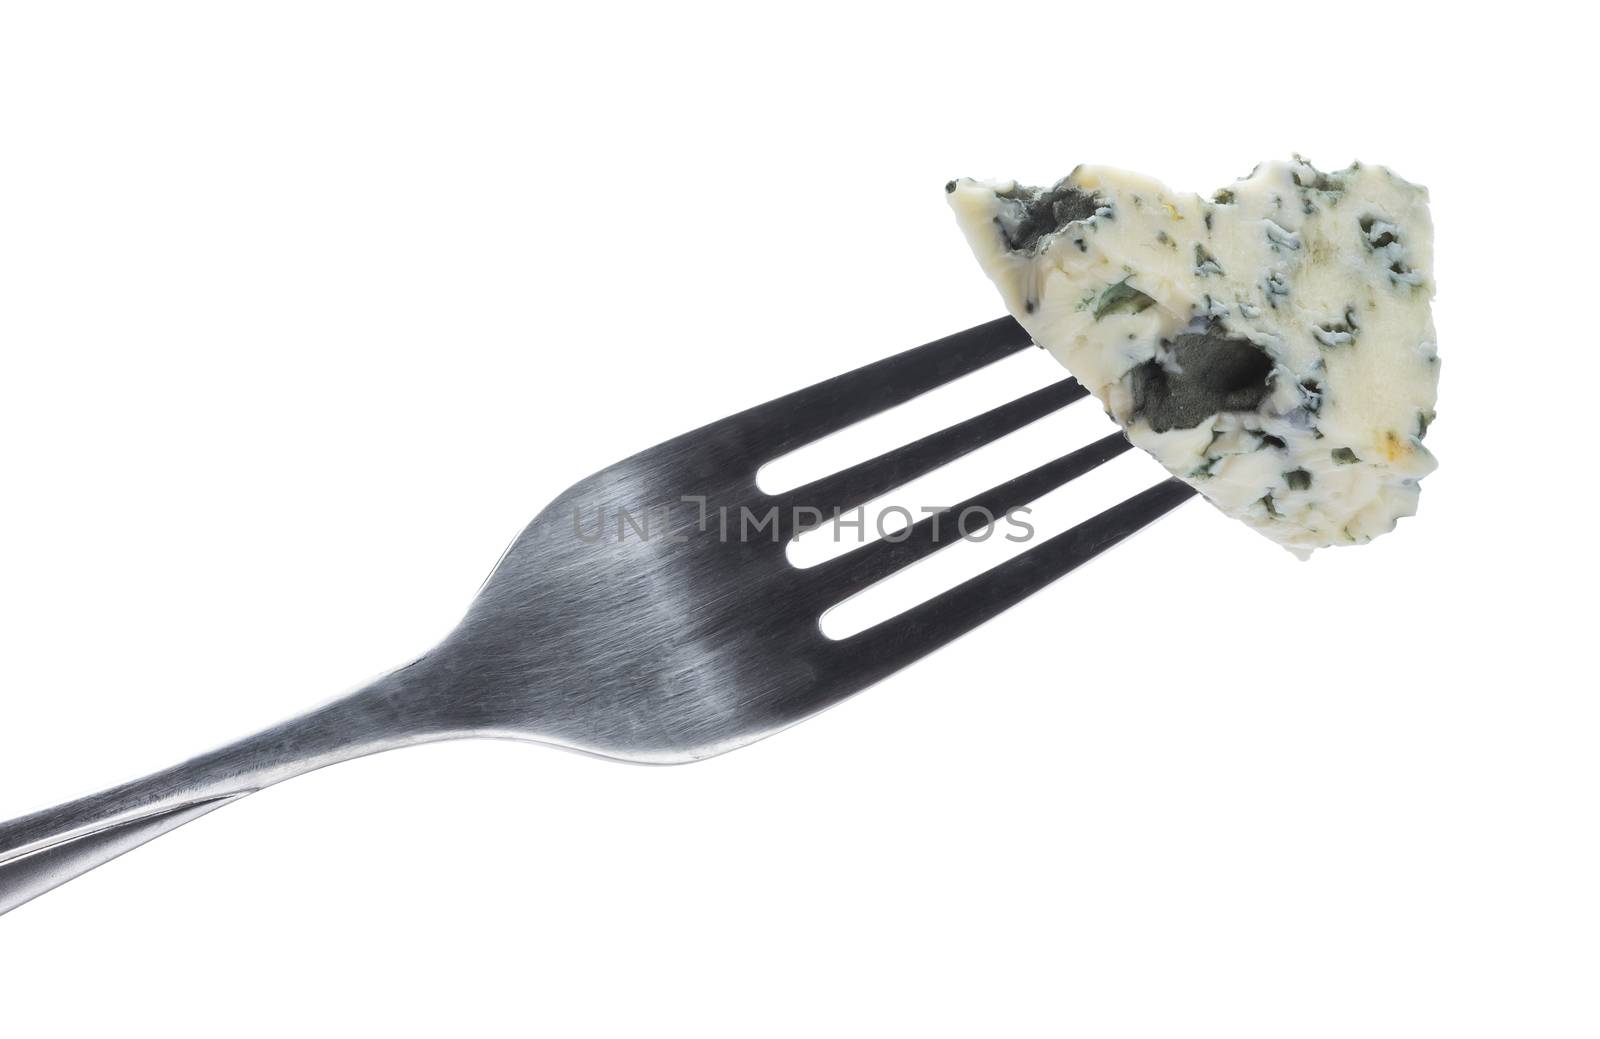 Danish blue cheese on fork isolated on white background with clipping path by xamtiw